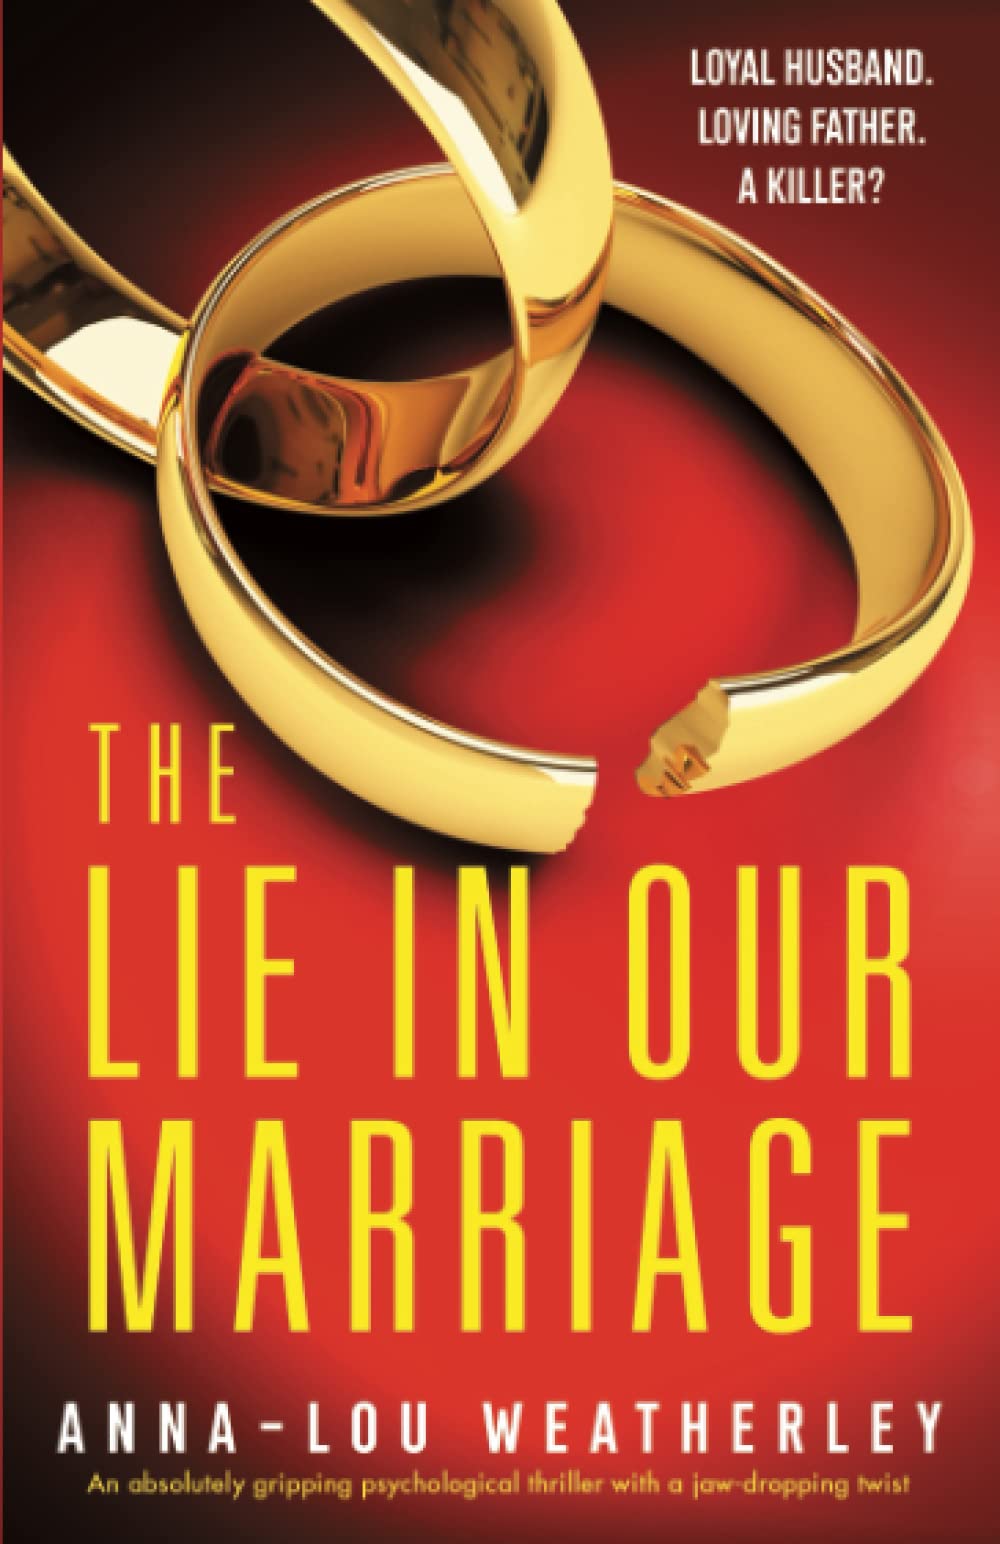 The Lie in Our Marriage SureShot Books